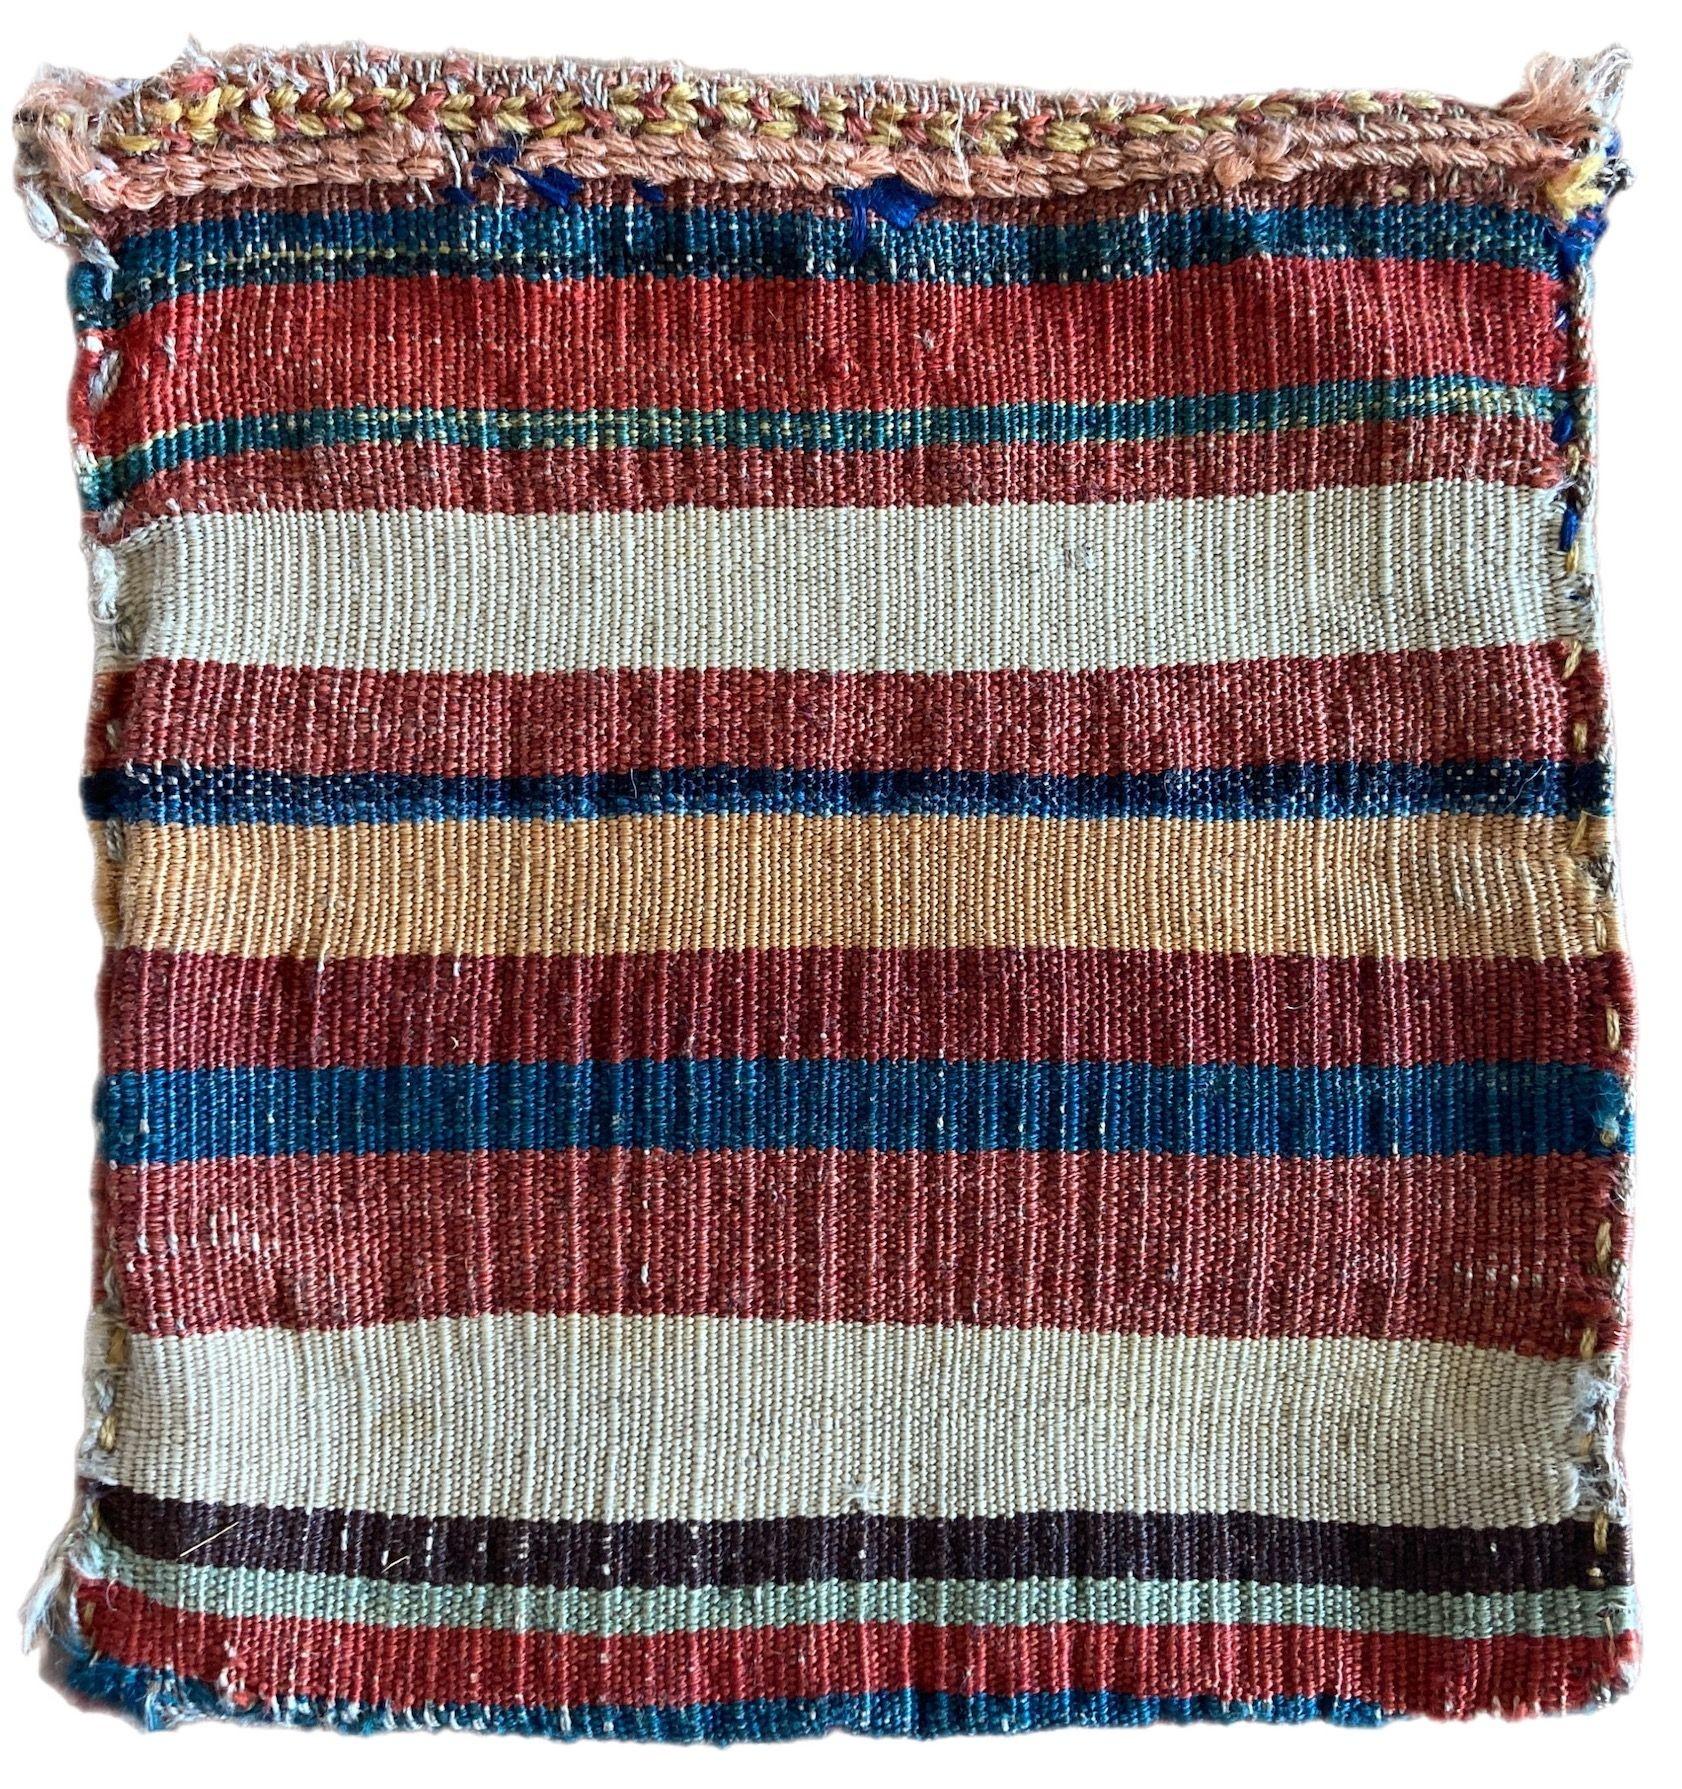 A beautiful antique Chanteh woven by the nomadic Qashqai tribe circa 1880. It is woven on one side with an attractive banded kilim on the reverse. The design features a diamond terracotta medallion on an unusual green field. These small vanity bags